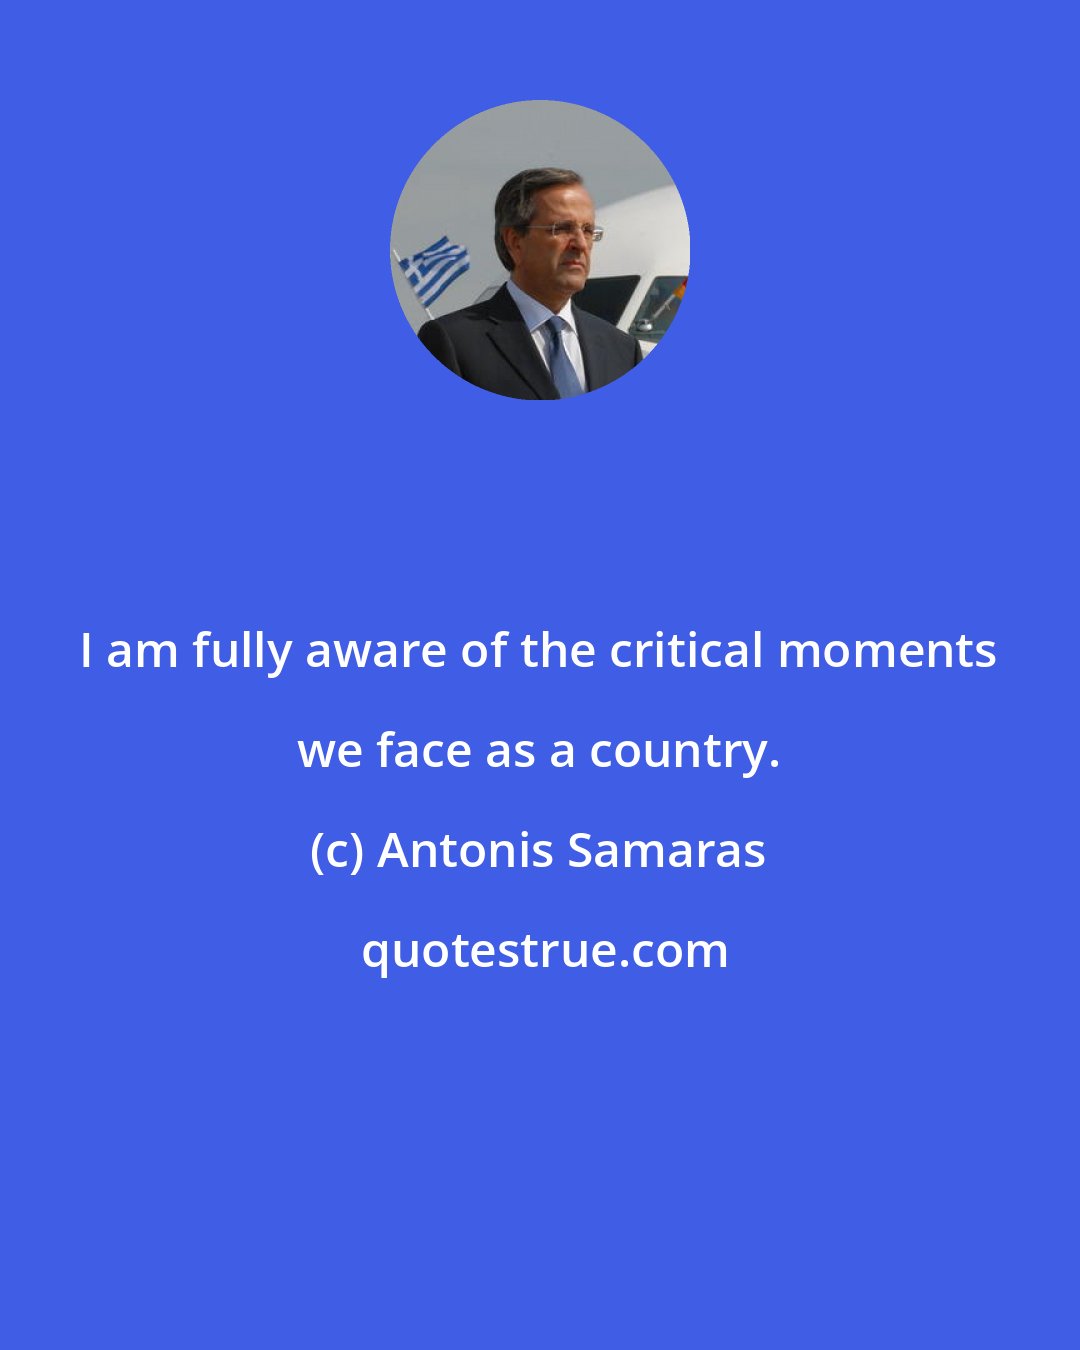 Antonis Samaras: I am fully aware of the critical moments we face as a country.